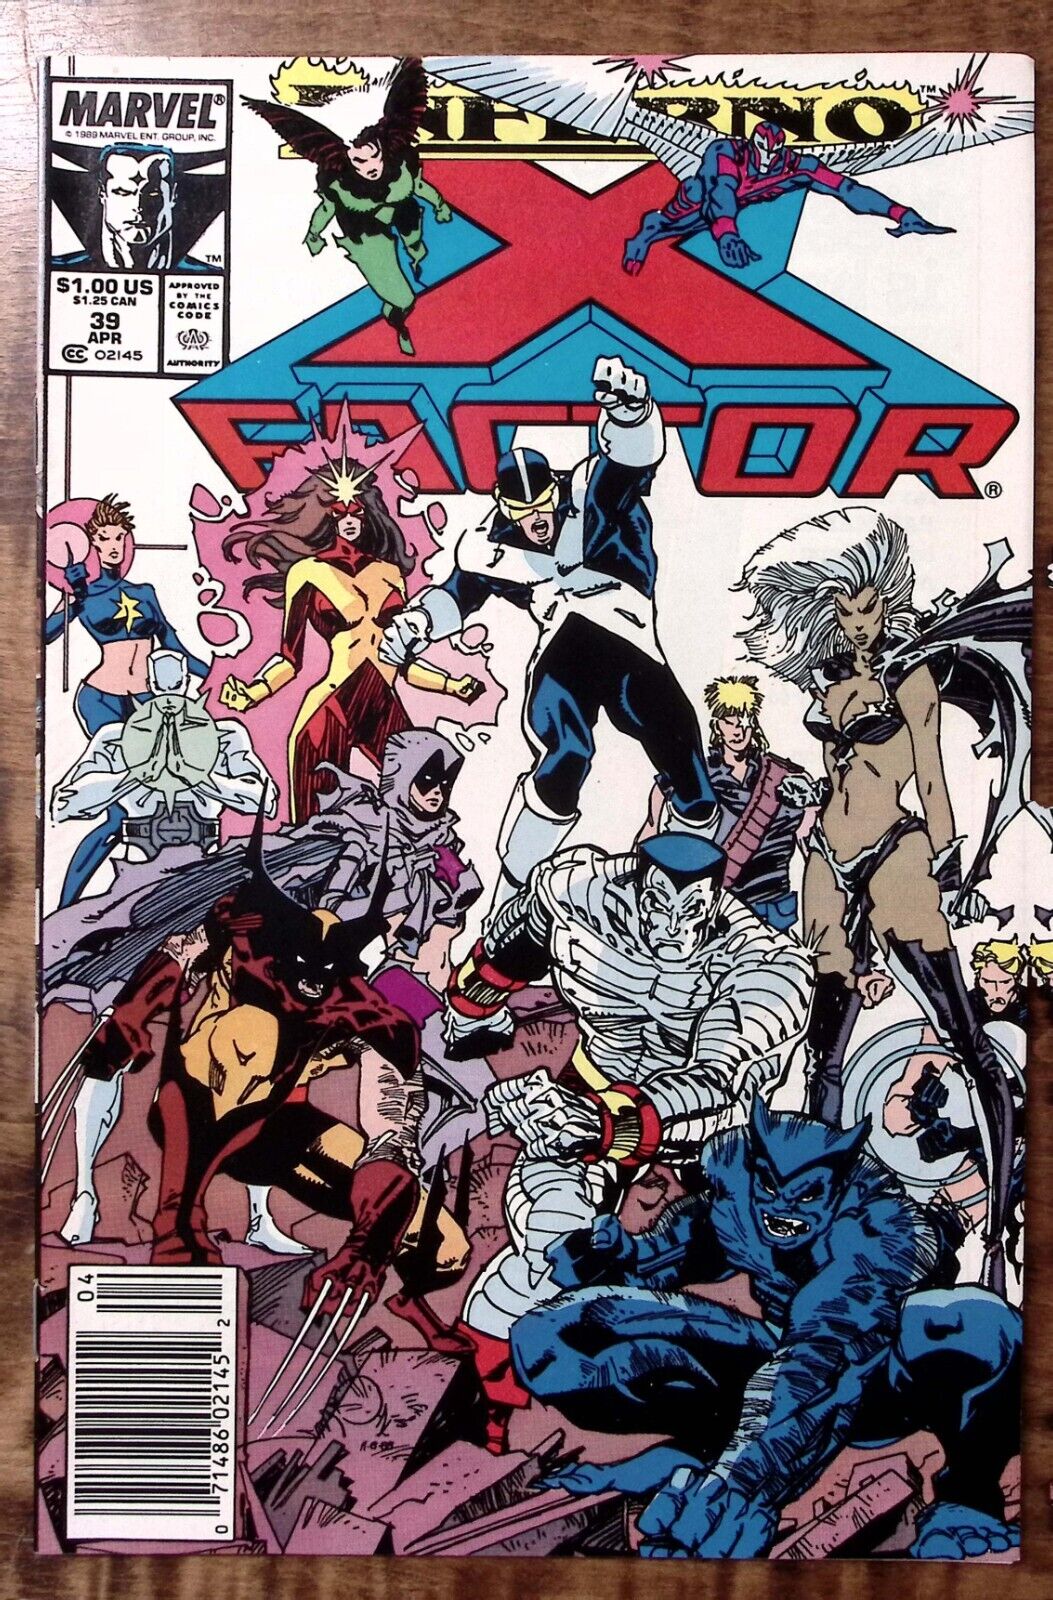 1989 X-FACTOR #39 APR INFERNO ASHES TO ASHES MARVEL COMICS  Z4414